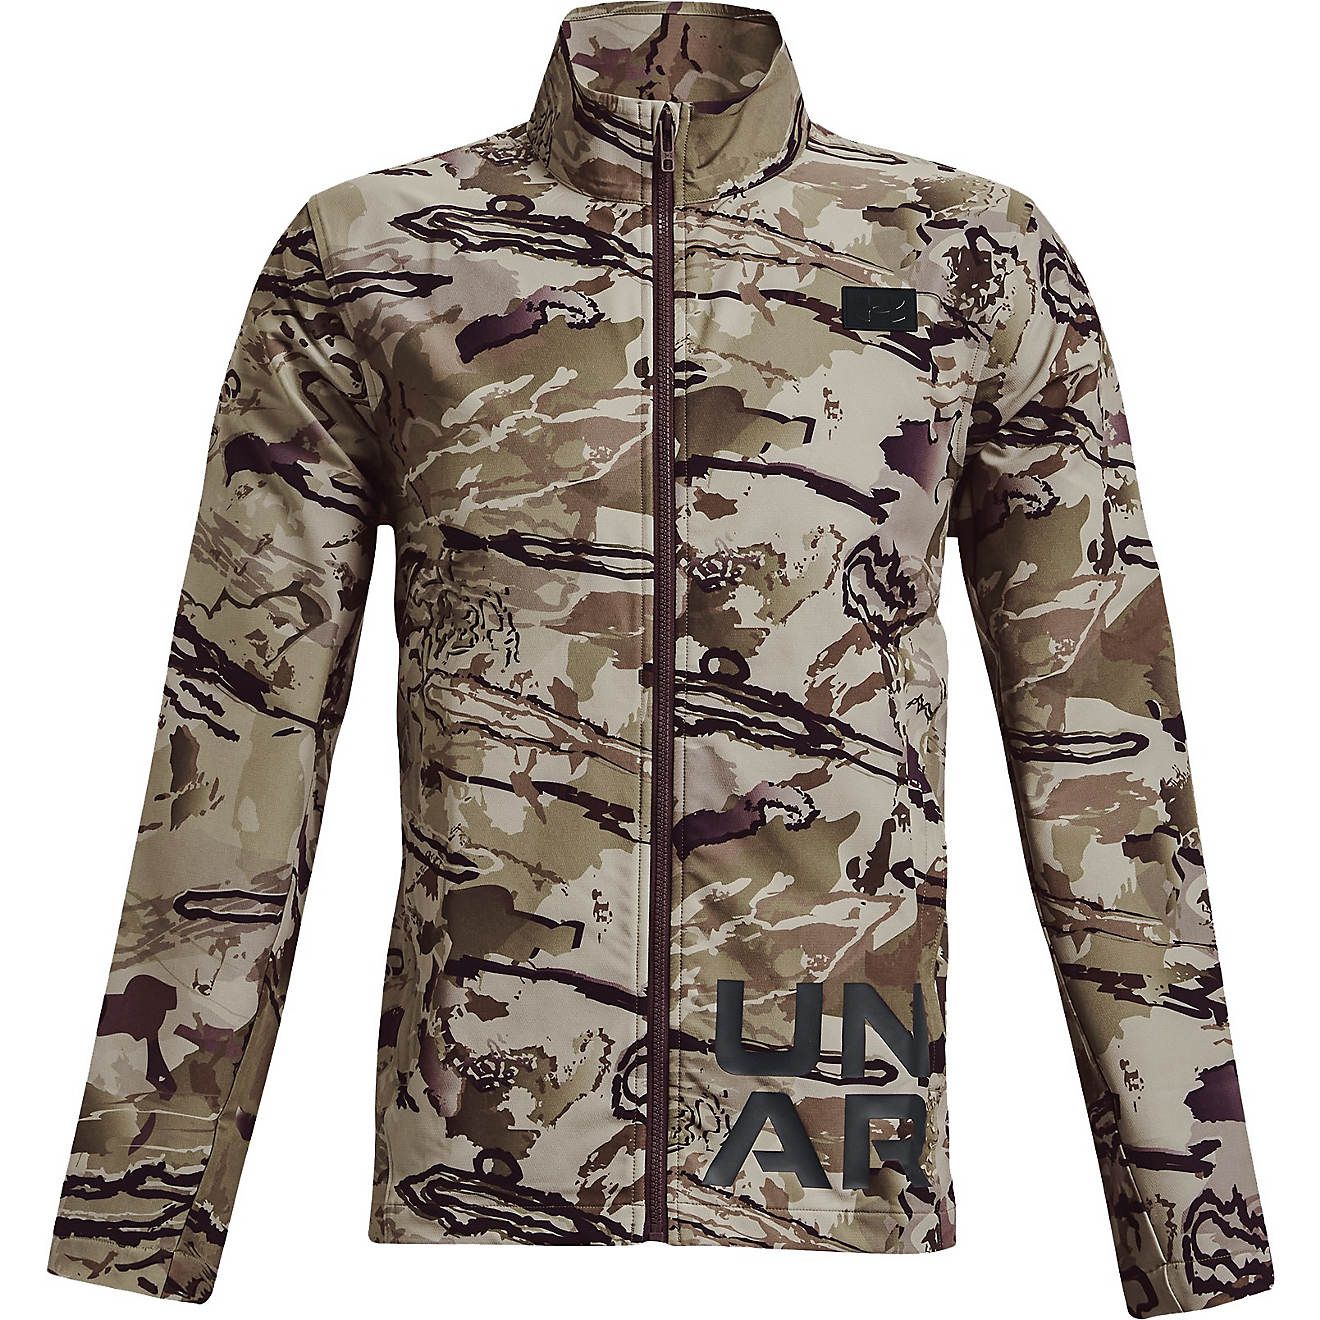 Under Armour Men's Hardwood Graphic Jacket | Academy | Academy Sports + Outdoors